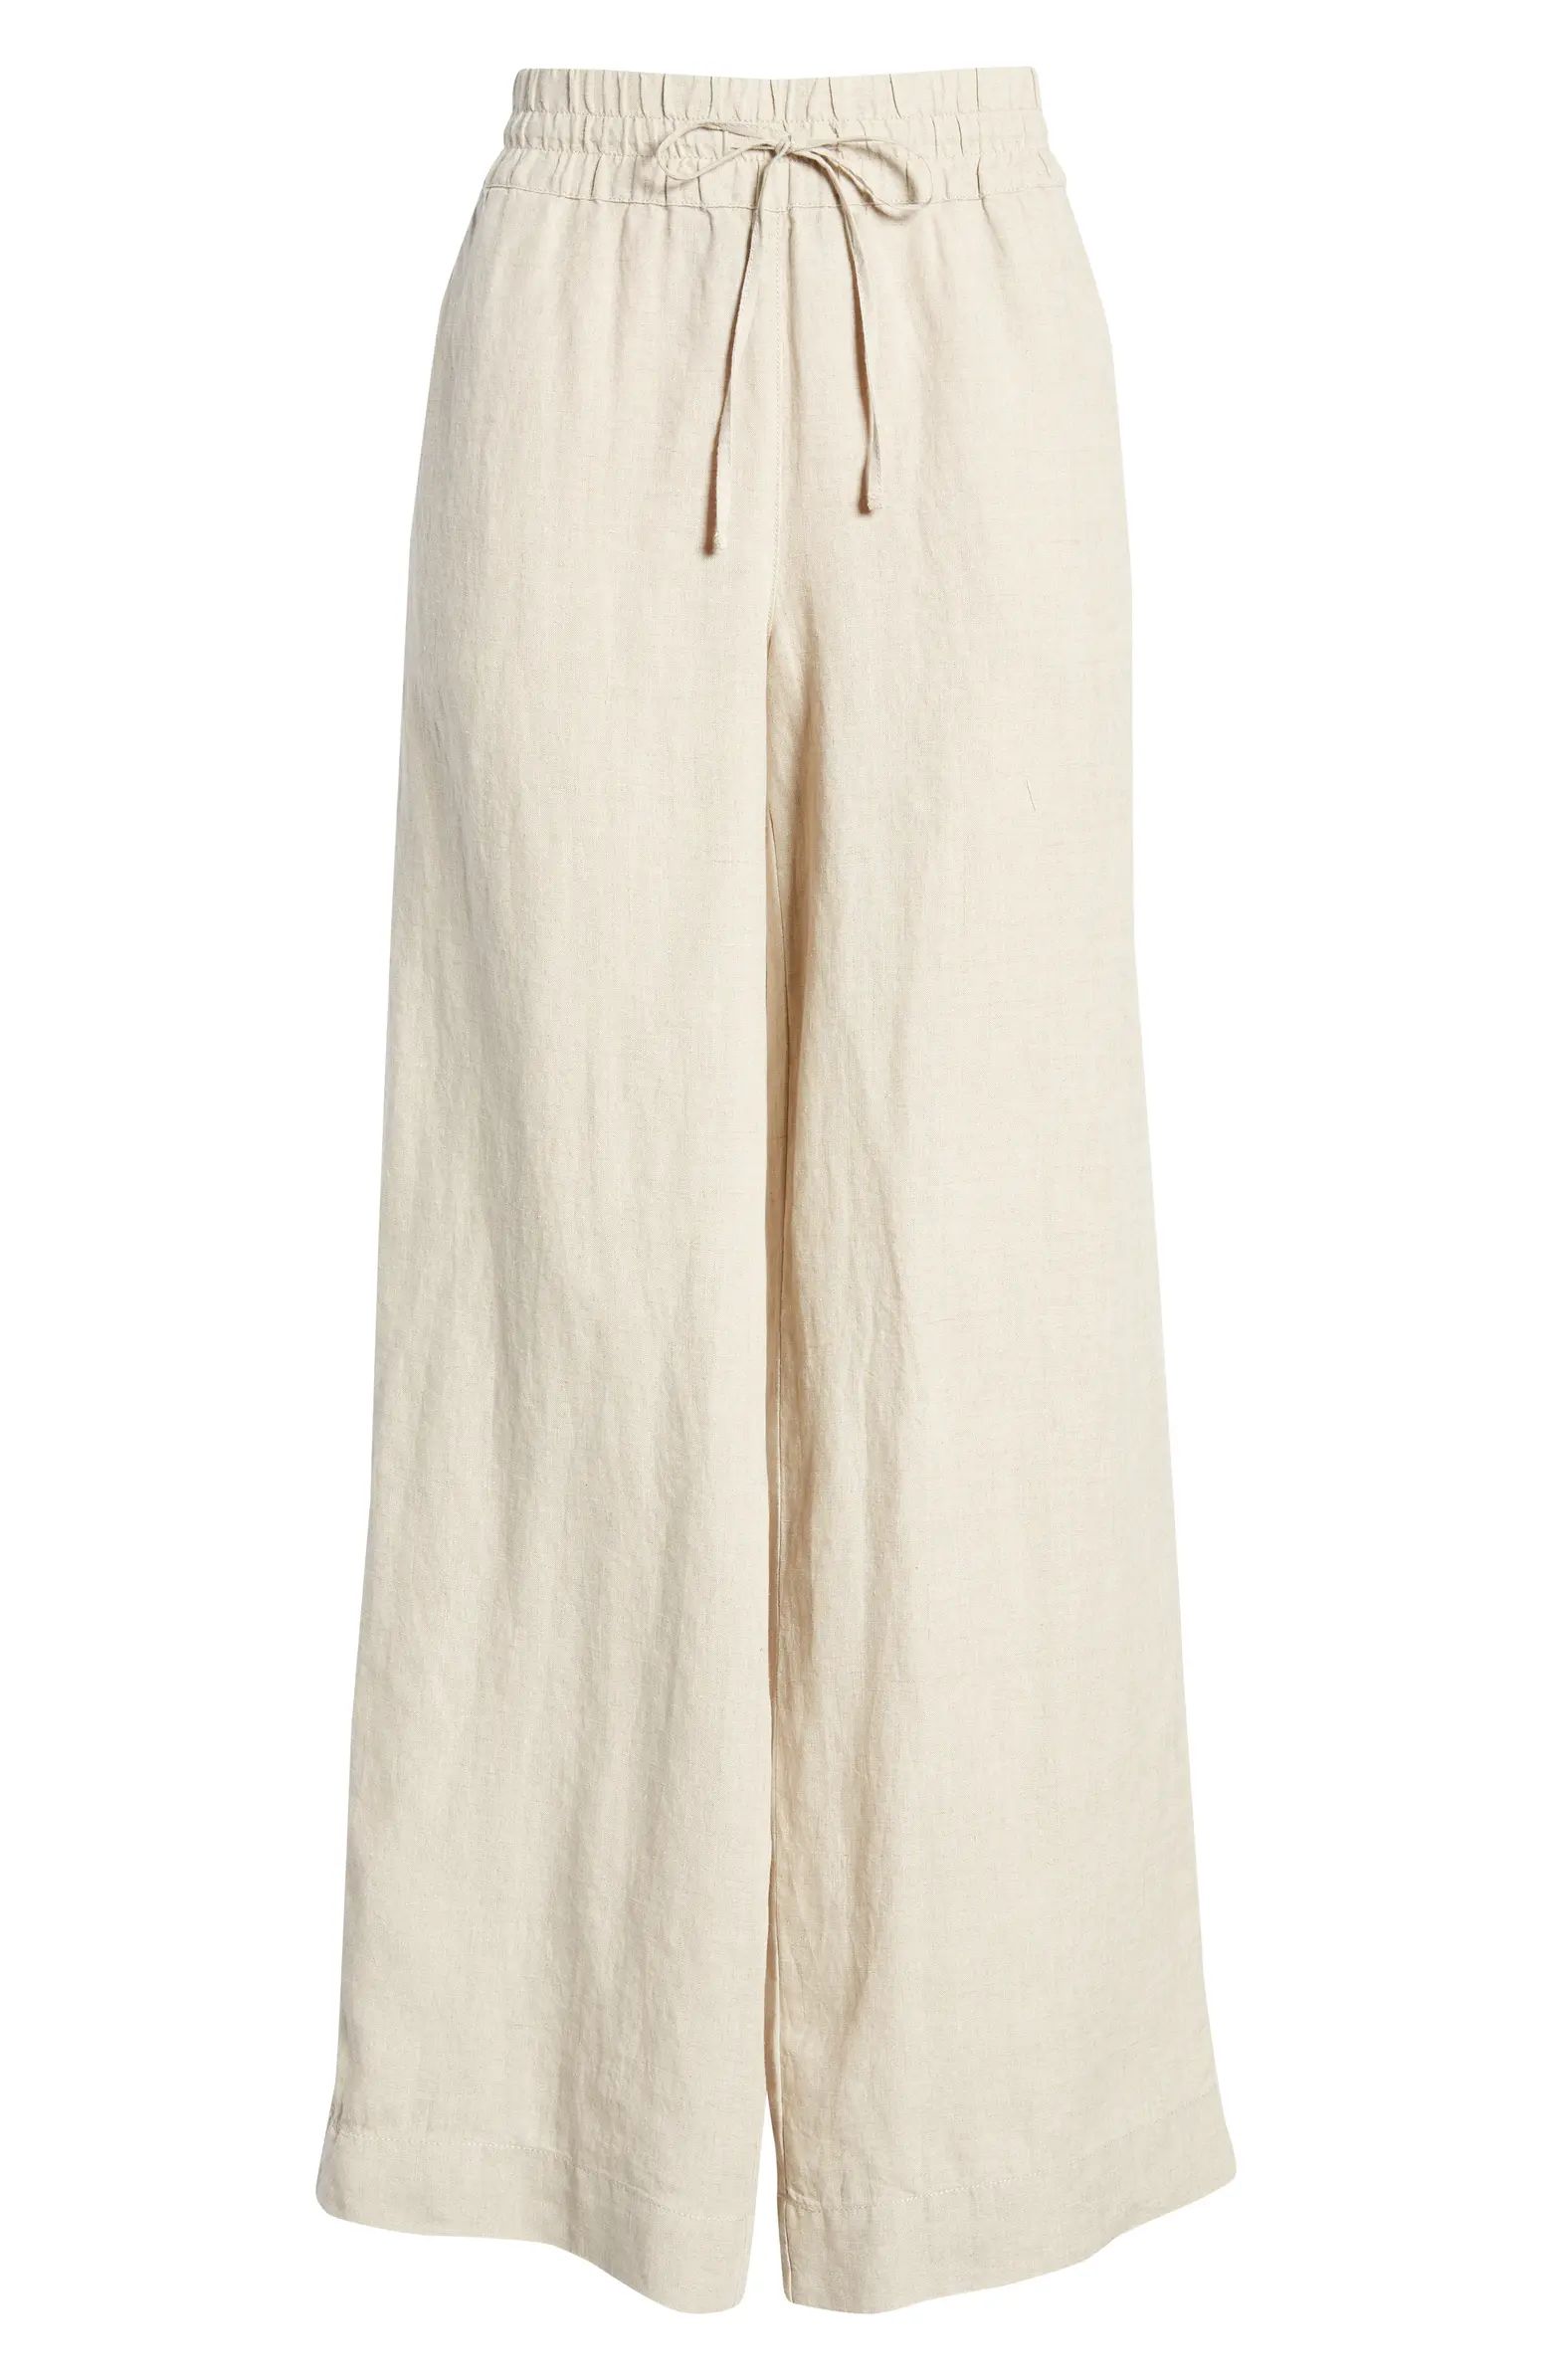 Tommy Bahama Two Palms High Waist Linen Pants | Nordstrom | Nordstrom